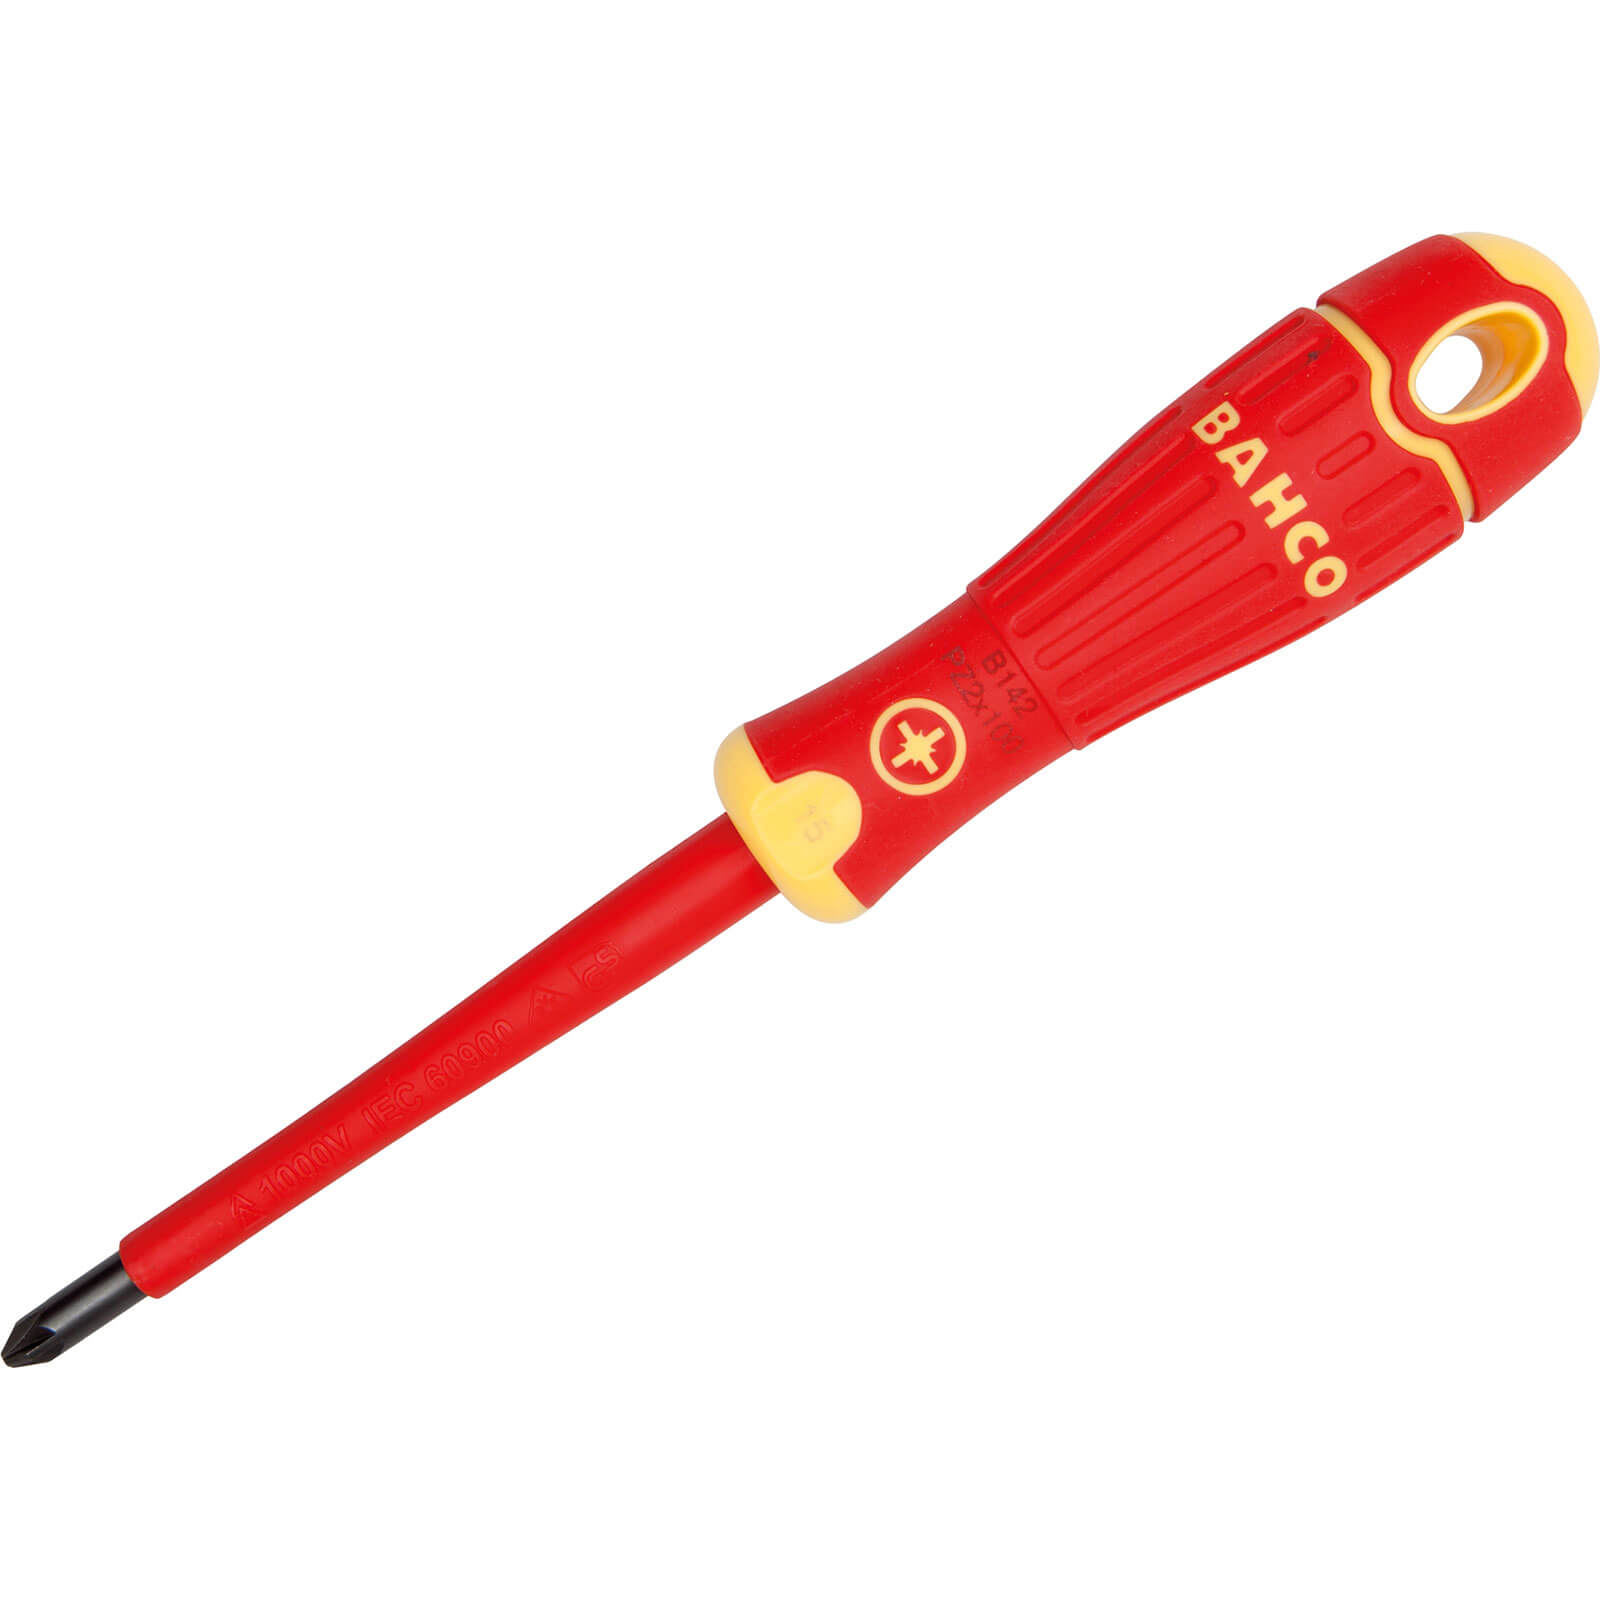 Photo of Bahco Vde Insulated Pozi Screwdriver Pz2 100mm